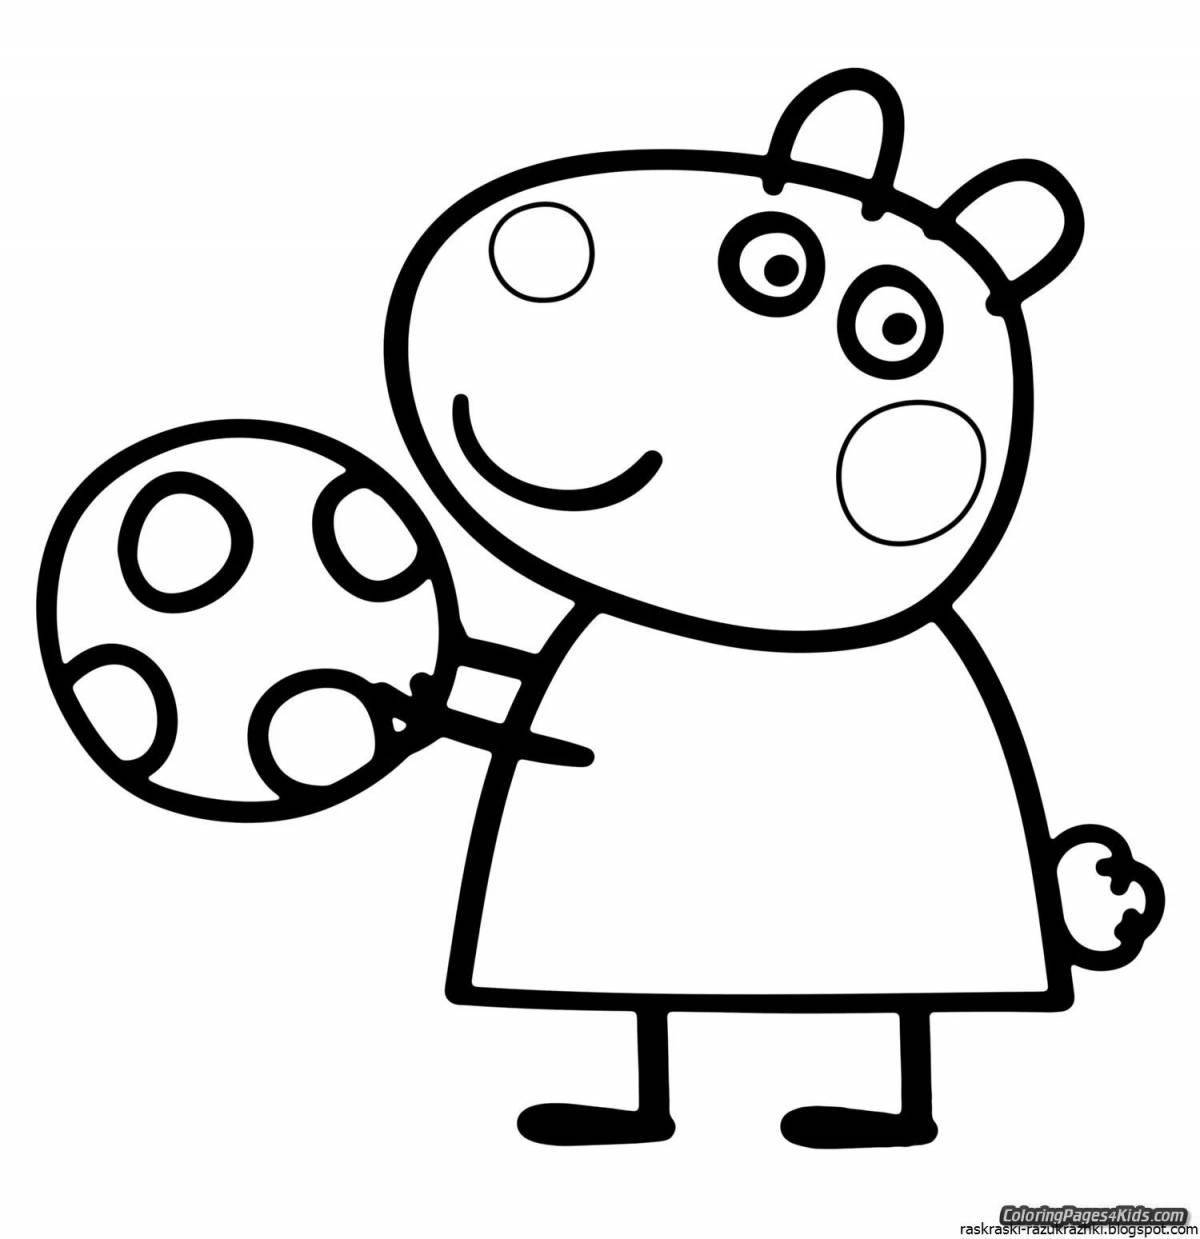 Colorful peppa pig coloring pages for kids